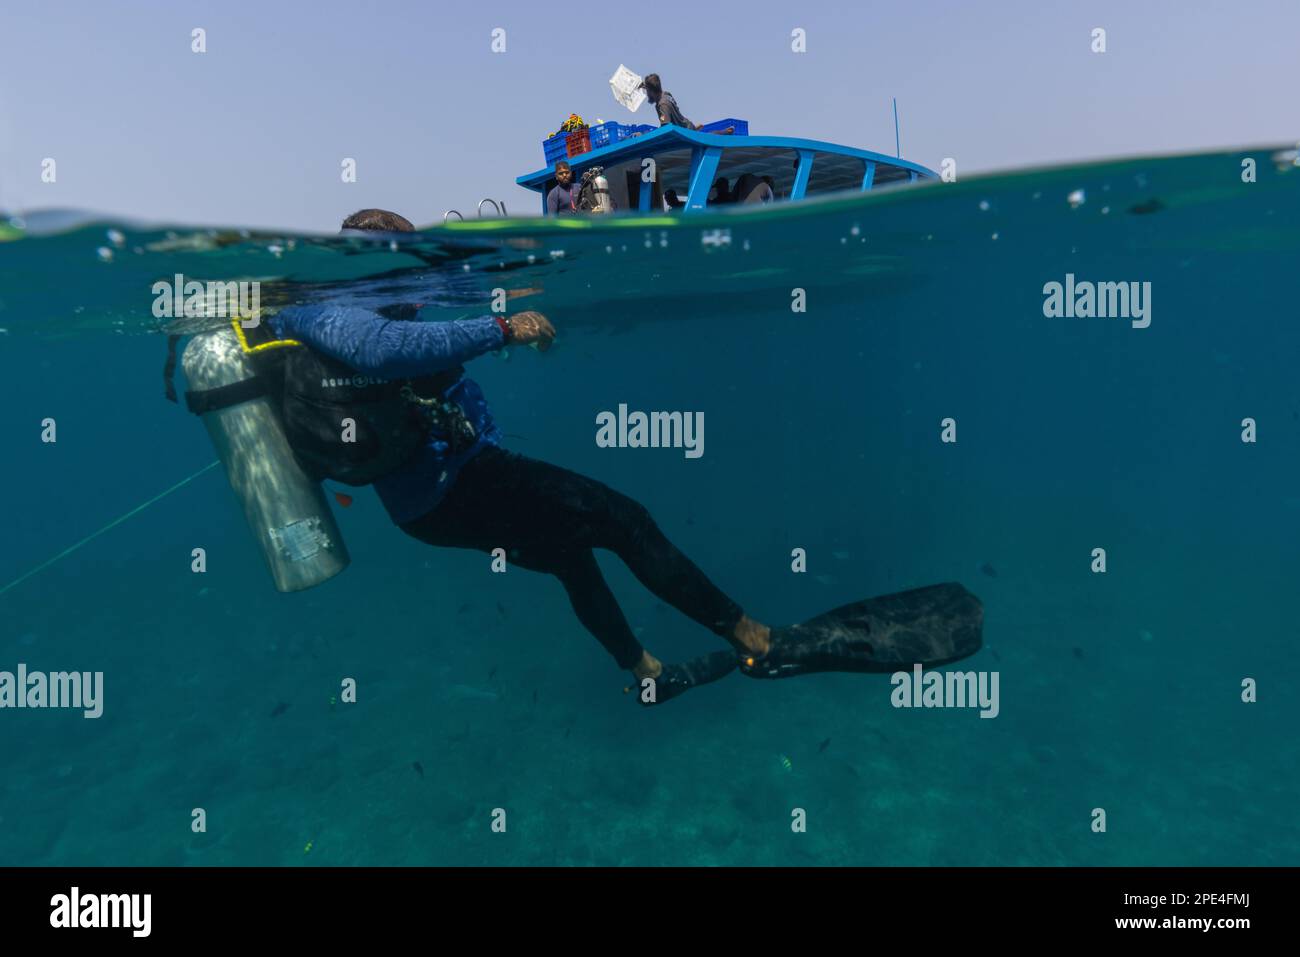 A Scuba Diver is about to descend underwater after jumping off from the boat (photographed in Netrani Island - Karnataka India) Stock Photo